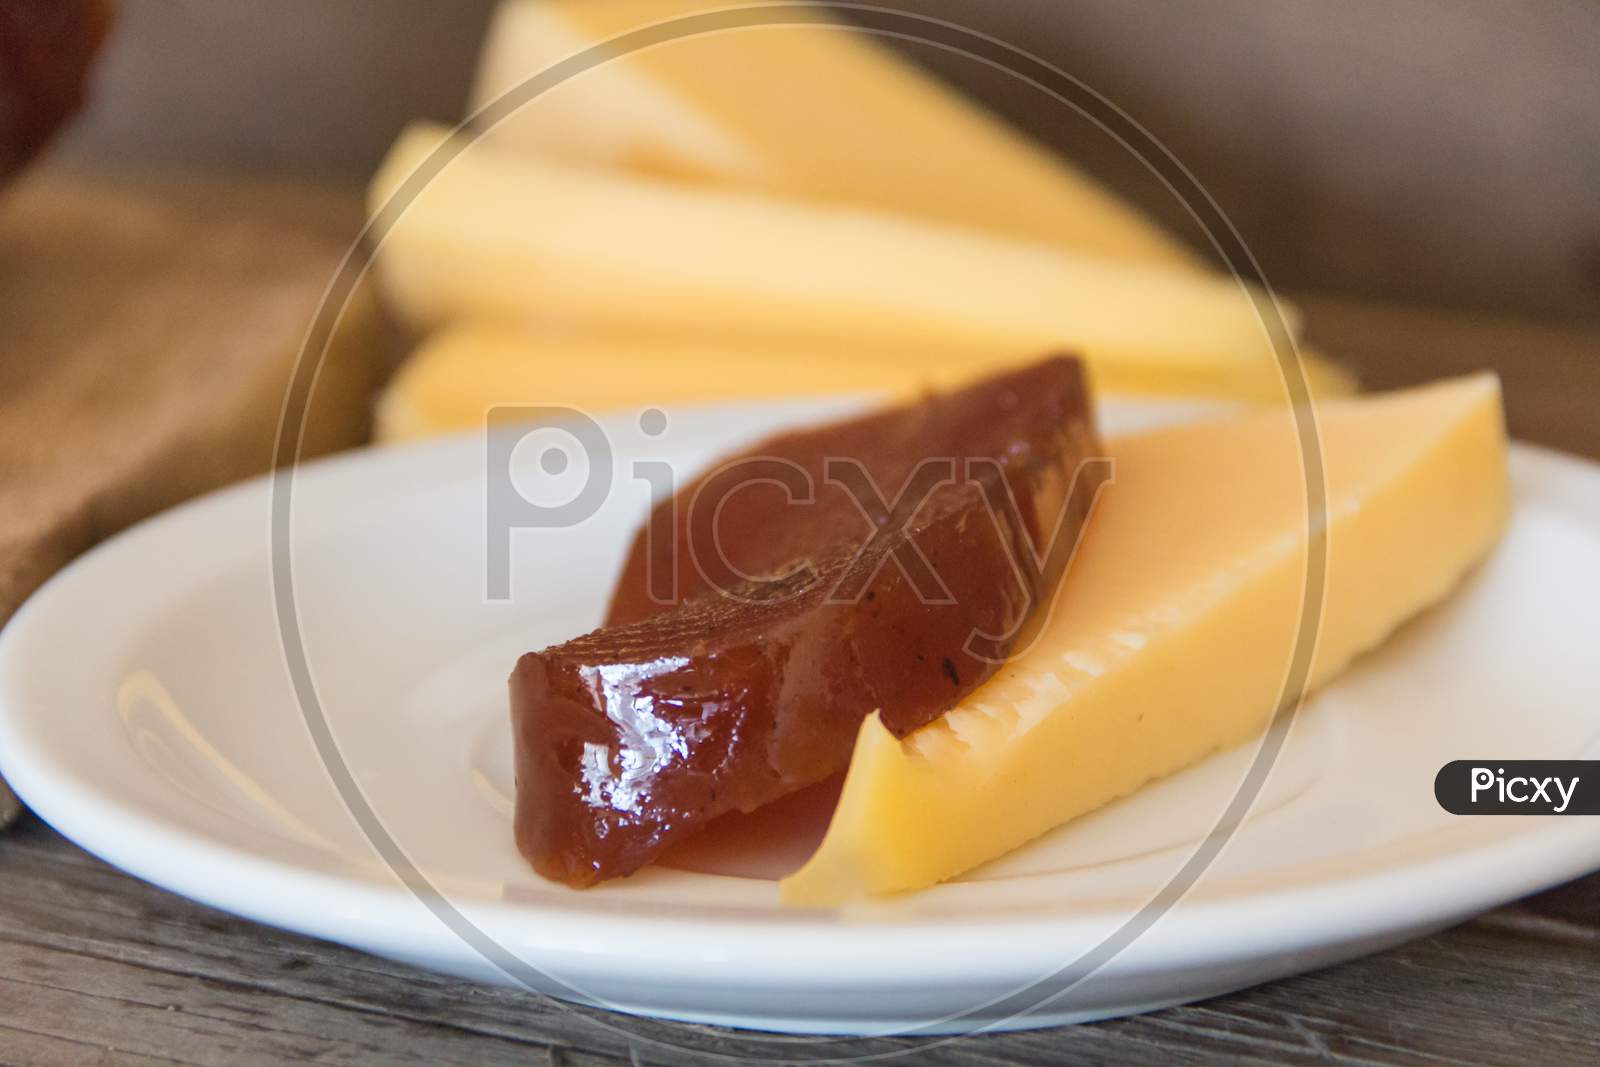 Sweet Potato And Quince Cheese And Sweet. Traditional Dessert Of Uruguayan And Argentine Gastronomy